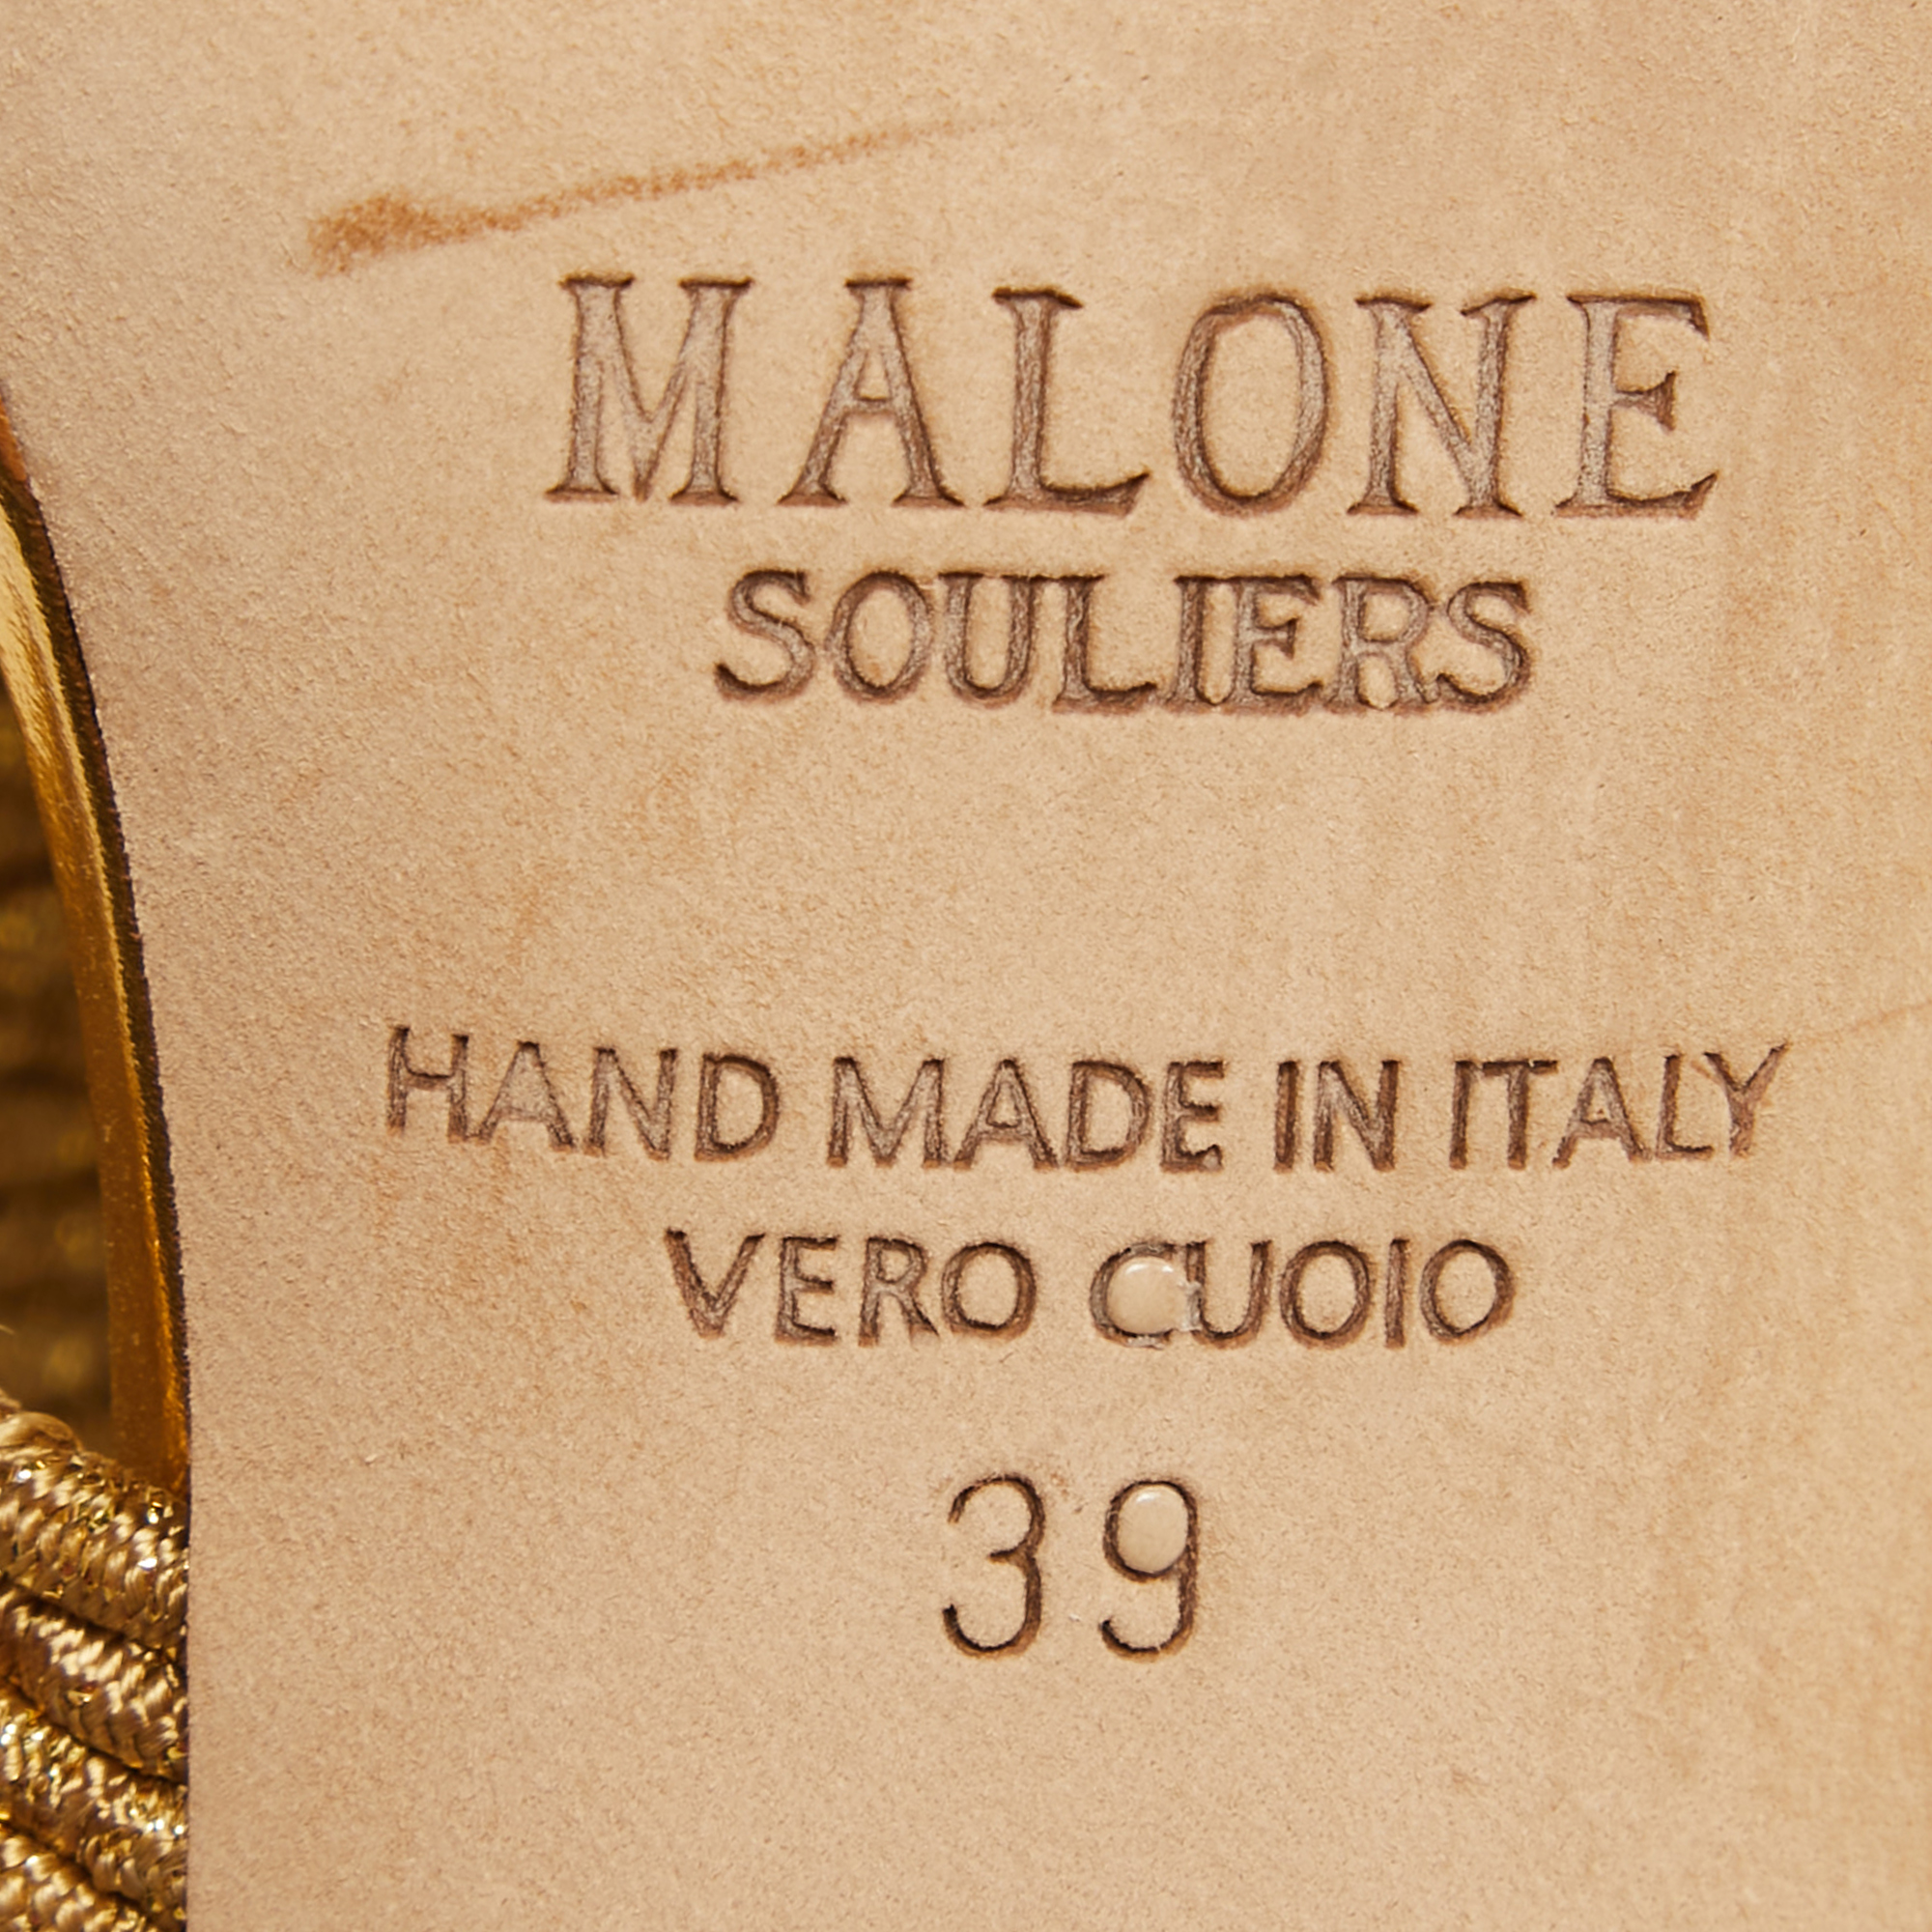 Malone Souliers Gold Leather And Woven Lurex  Milena Slides Size 39